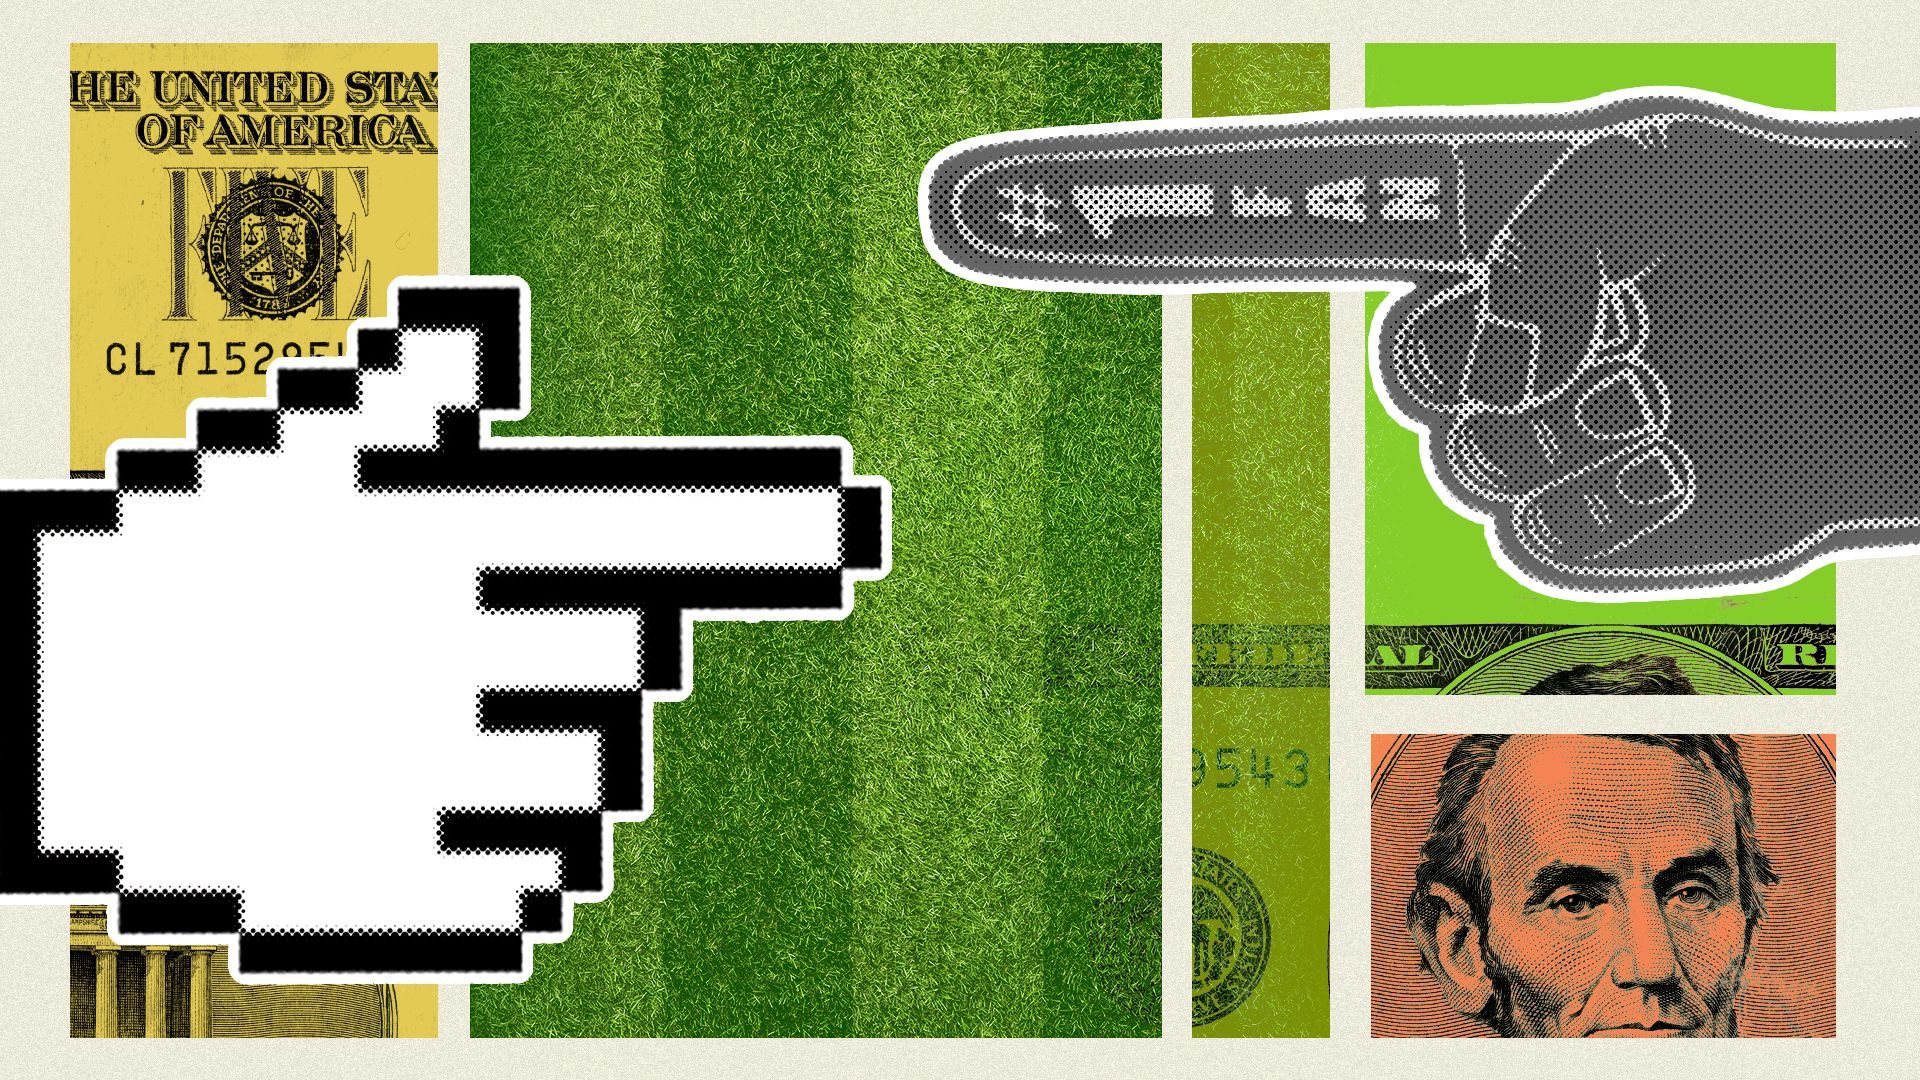 Illustrated collage of a hand cursor, foam hand, turf and money elements.